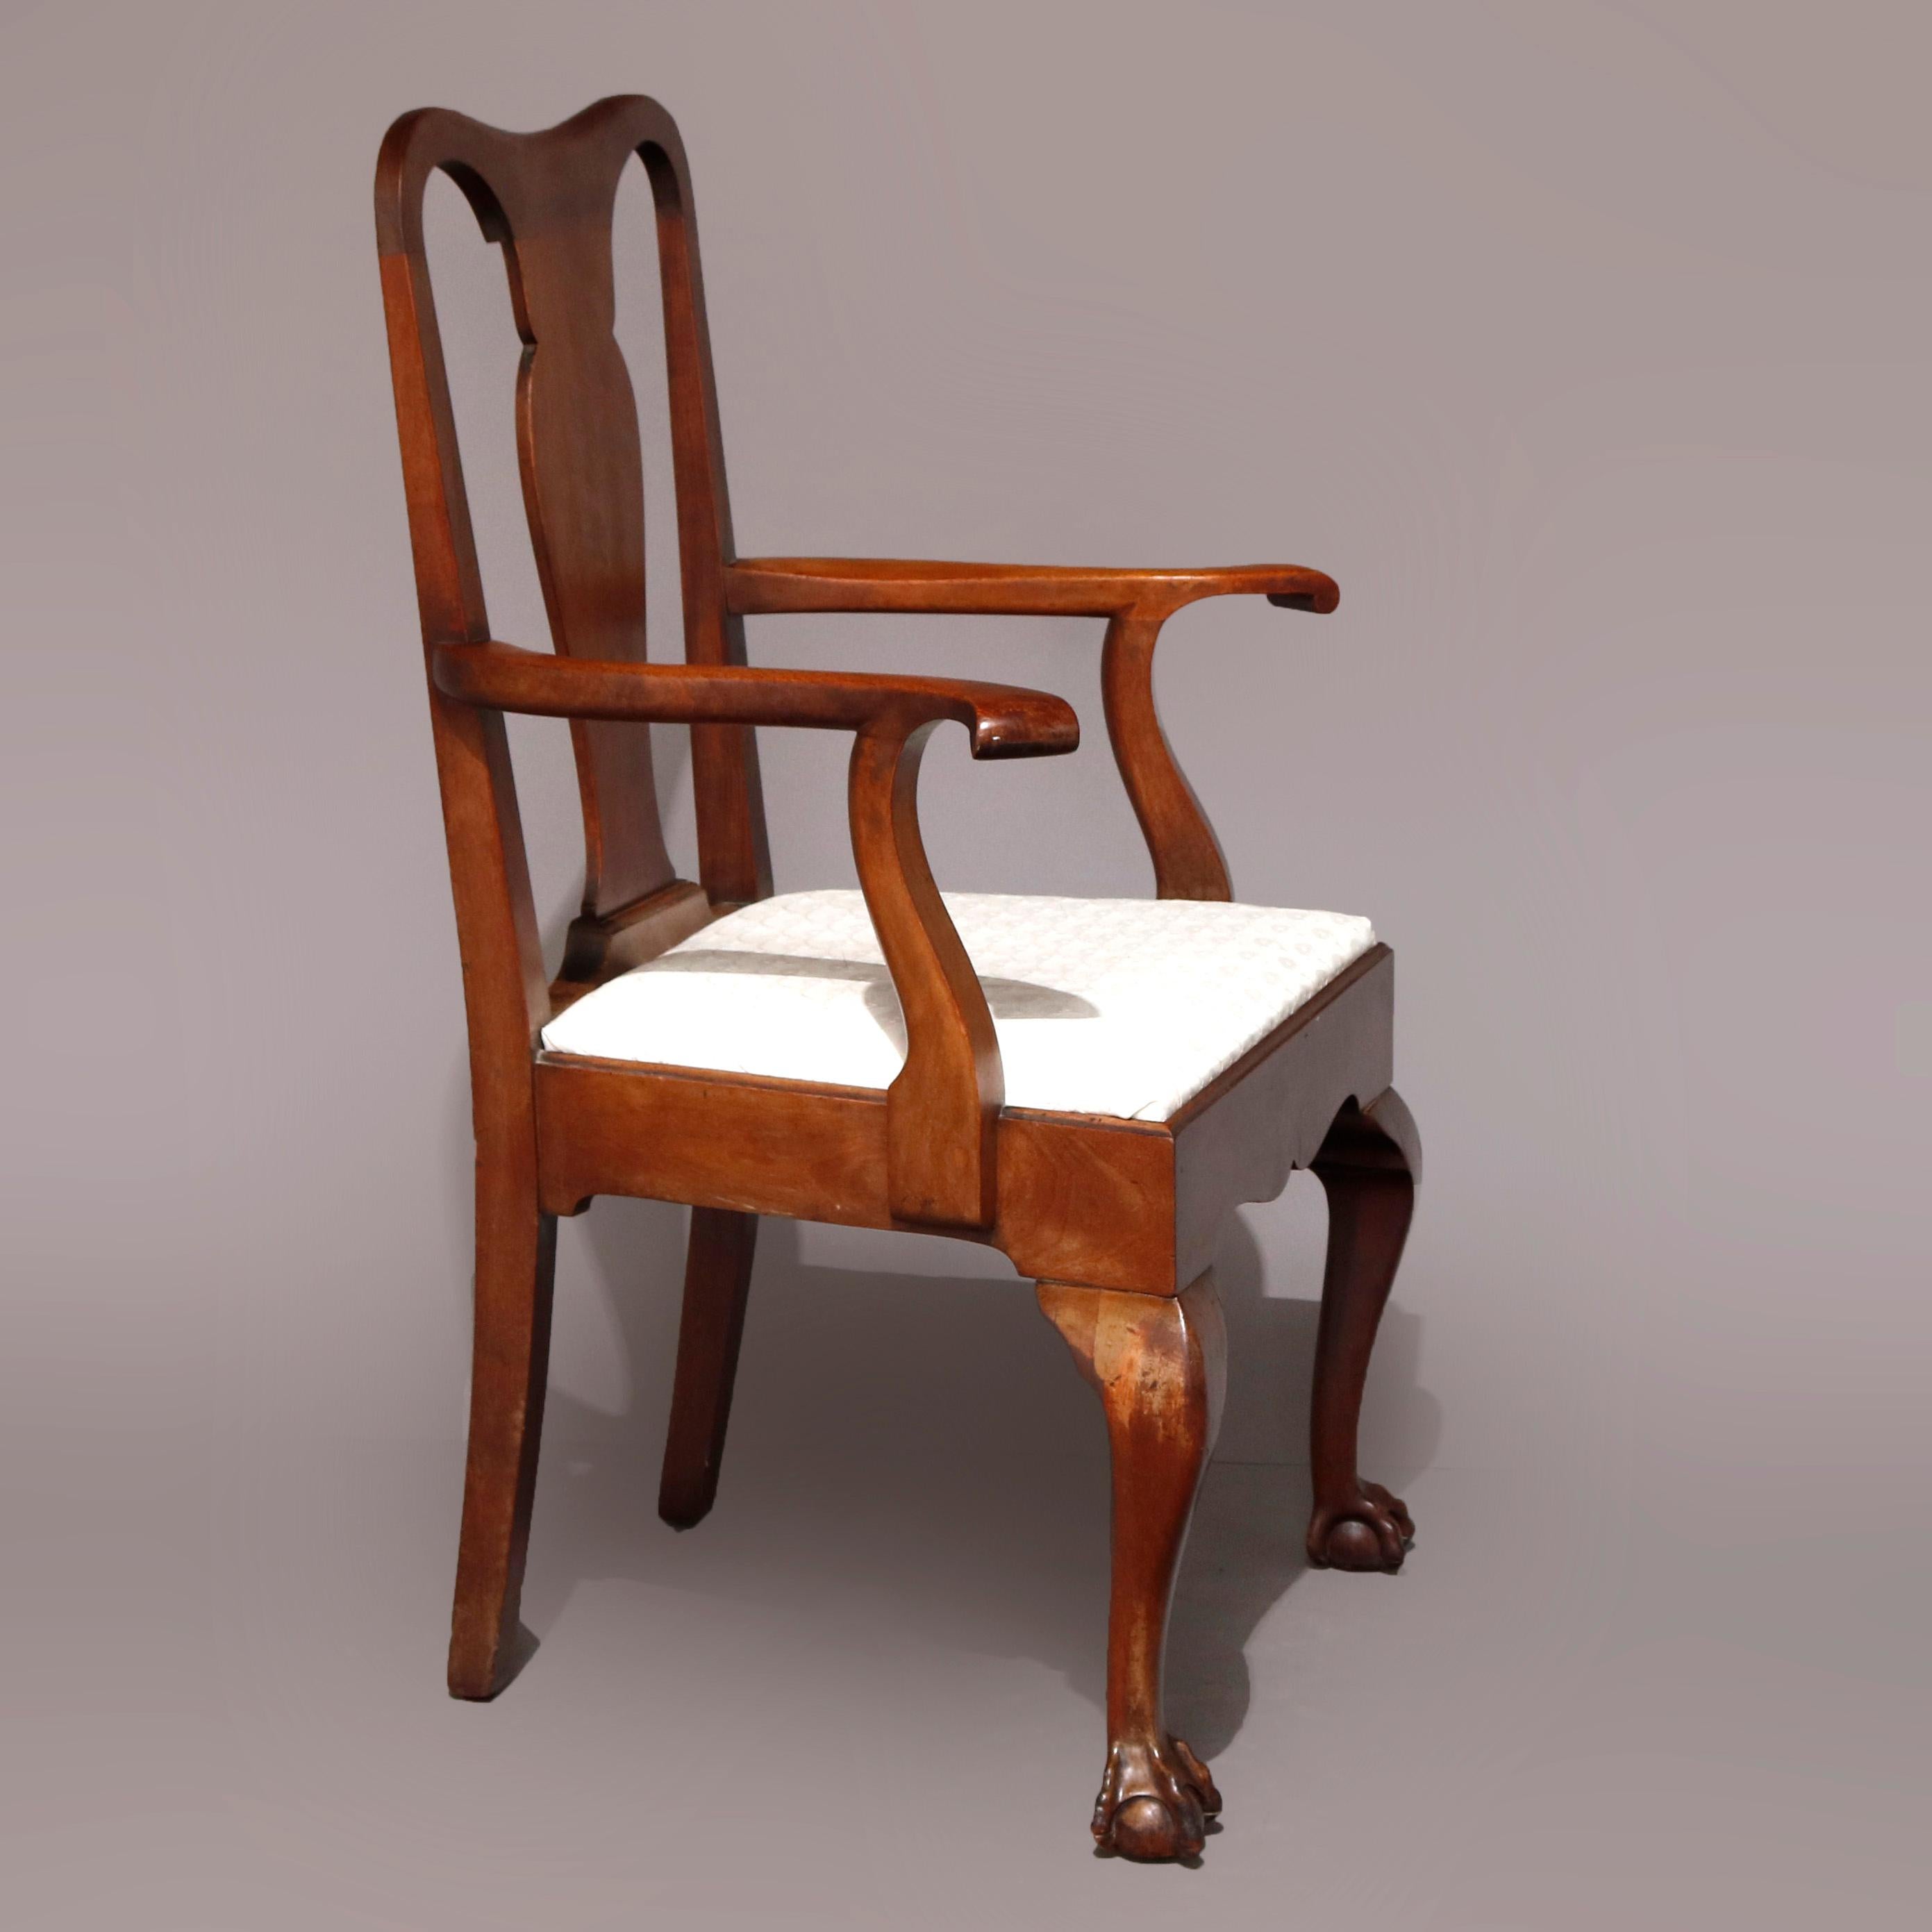 Upholstery Ten Antique American Empire Flame Mahogany Dining Chairs, circa 1900